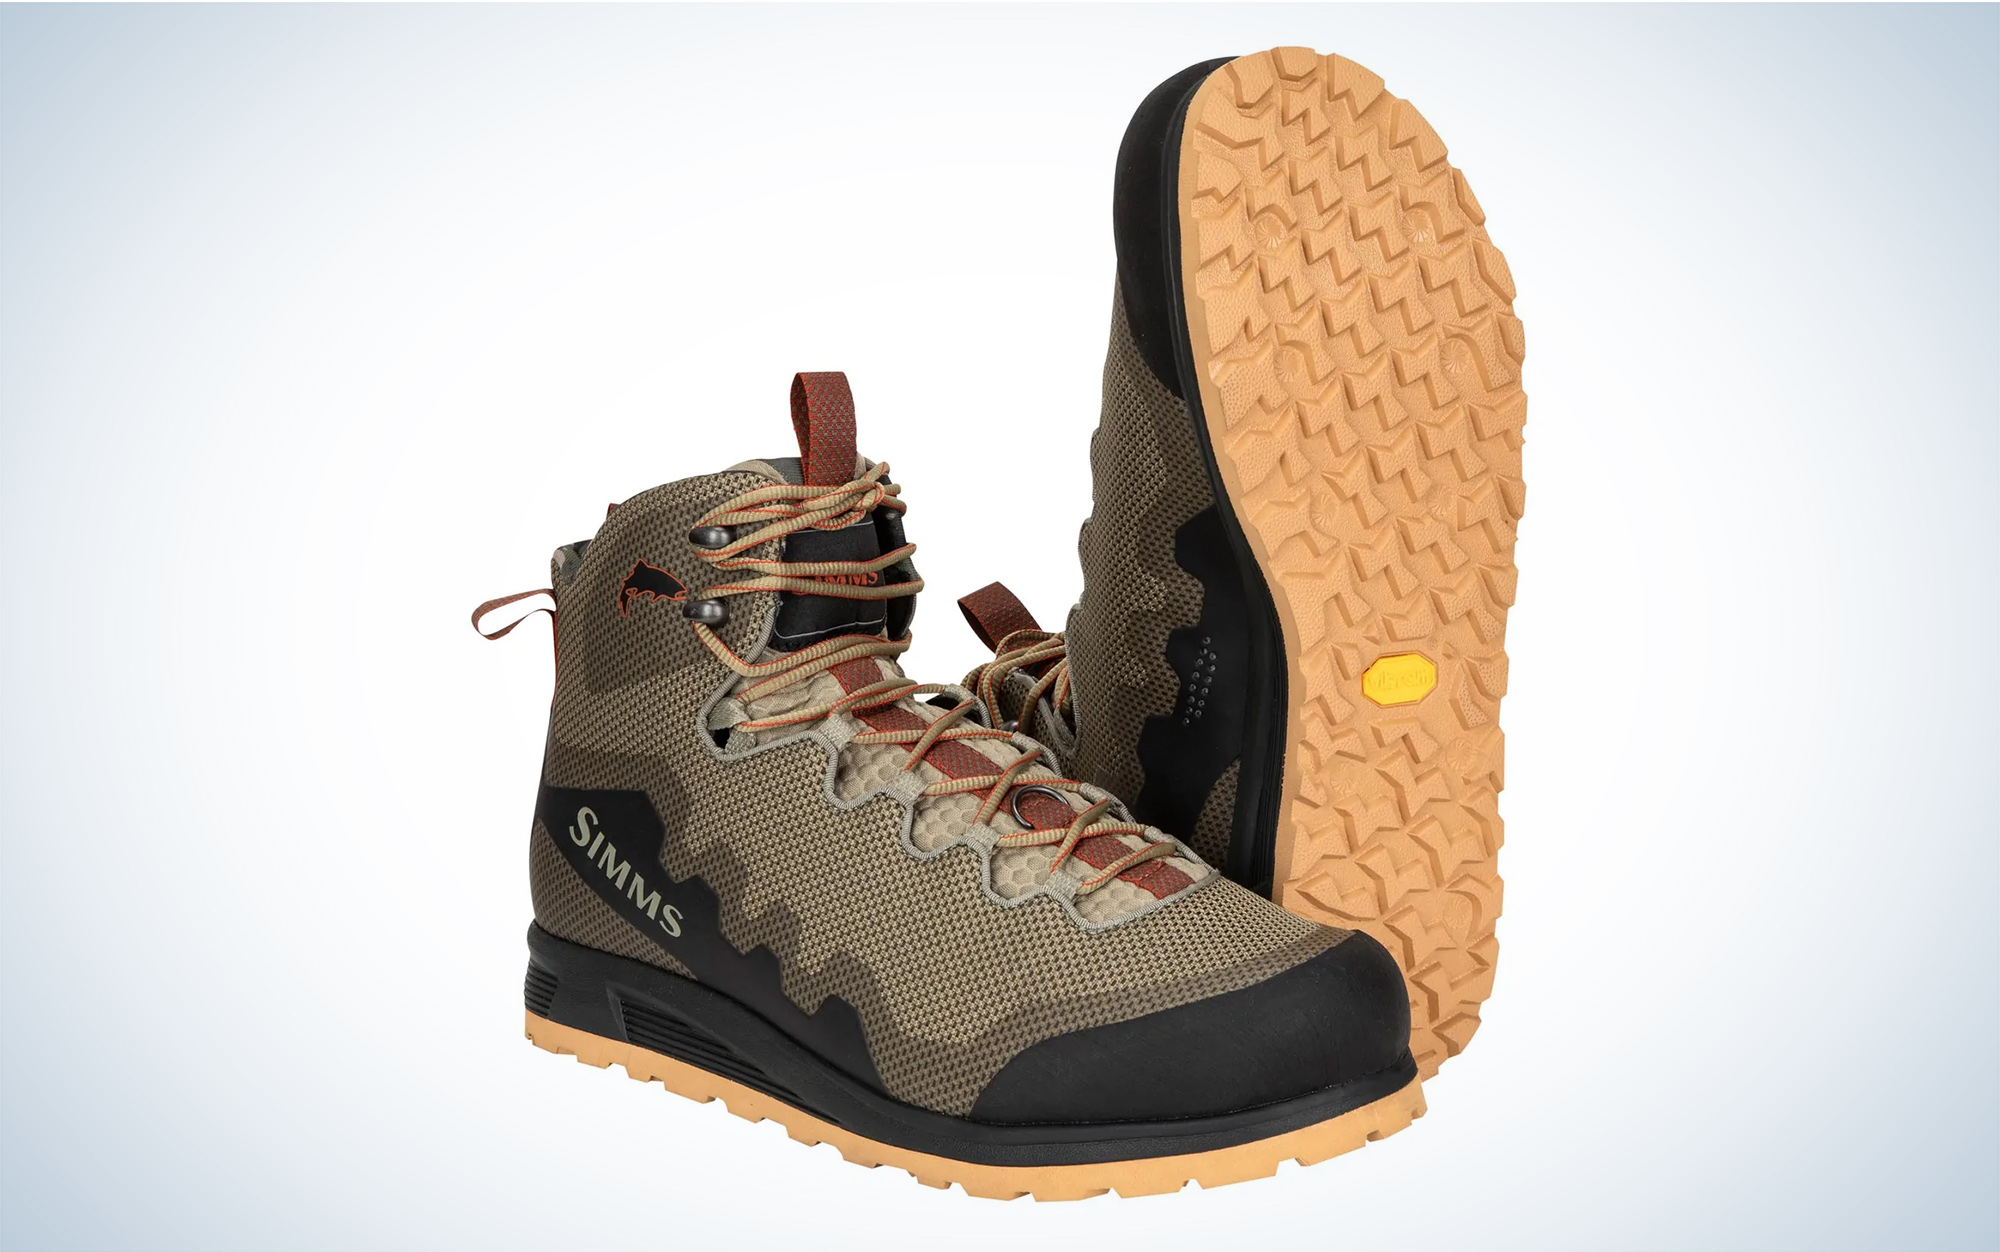 The Simms Flyweight Access Wading Boot is the best for hiking.